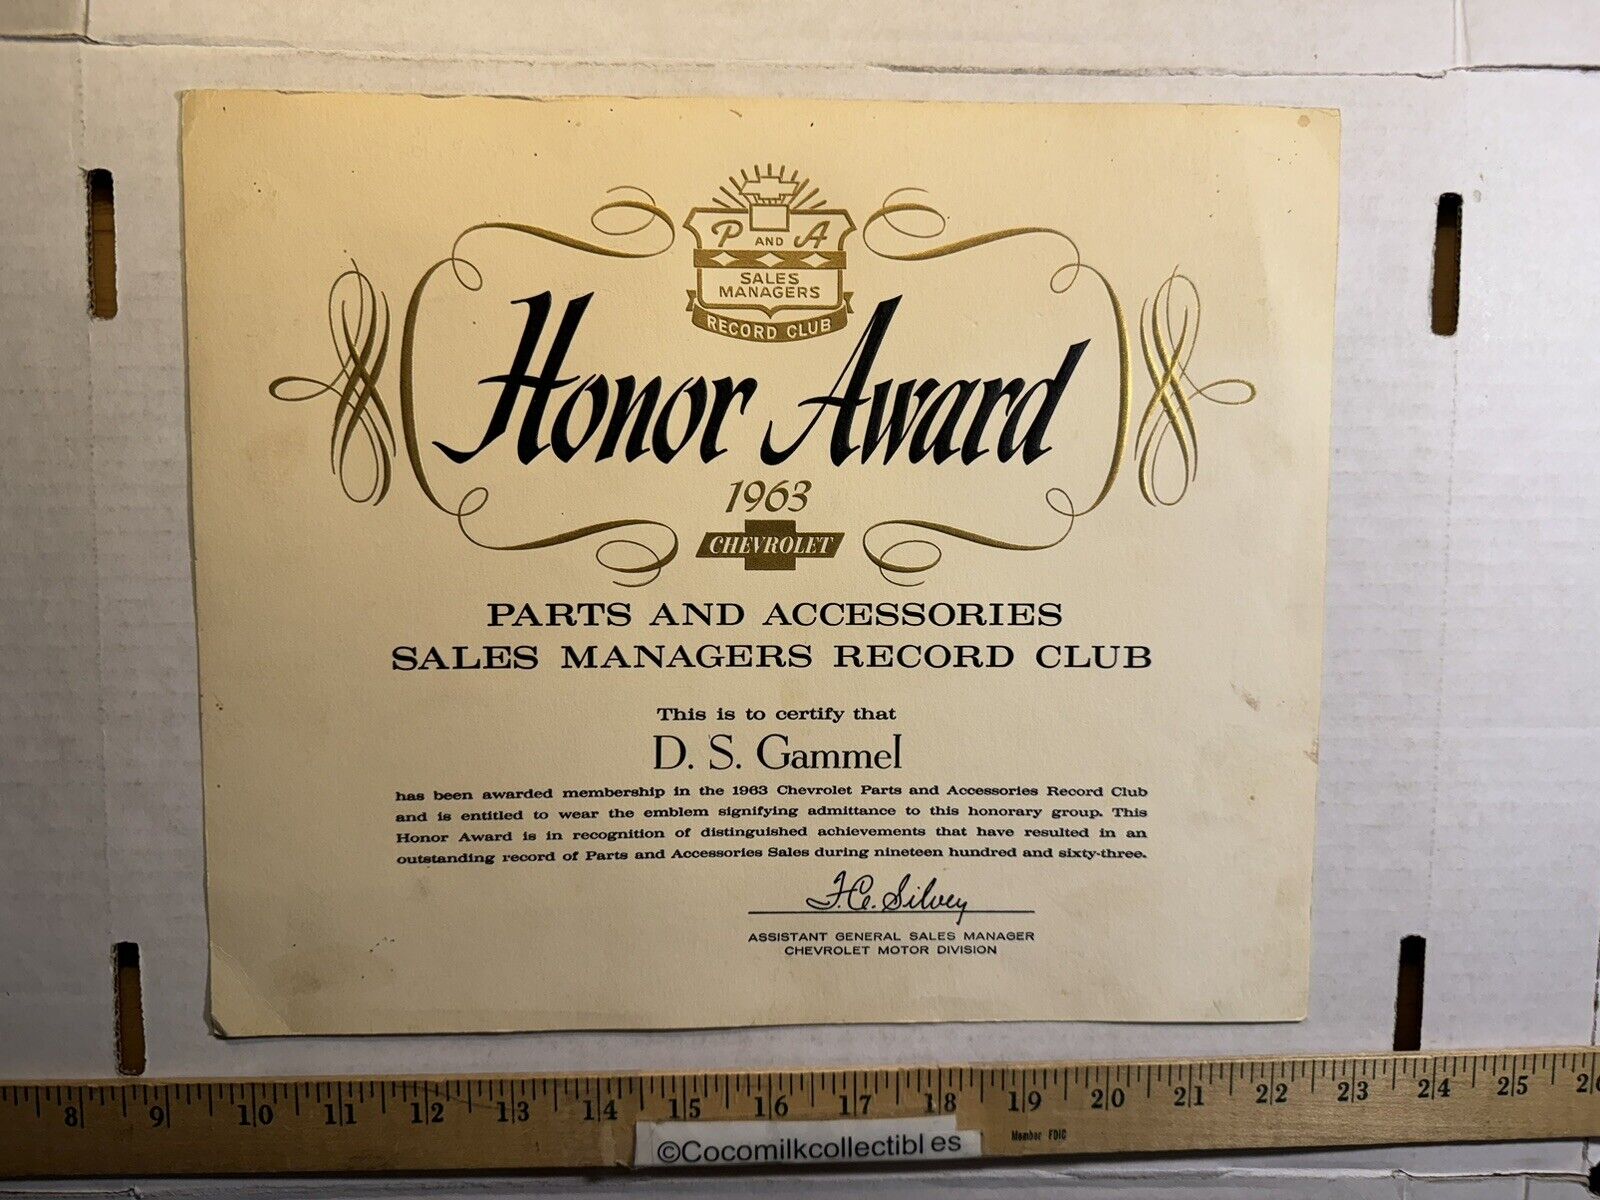 Vintage 1963 Chevrolet Parts/Accessories Sales Managers Record Club Honor Award